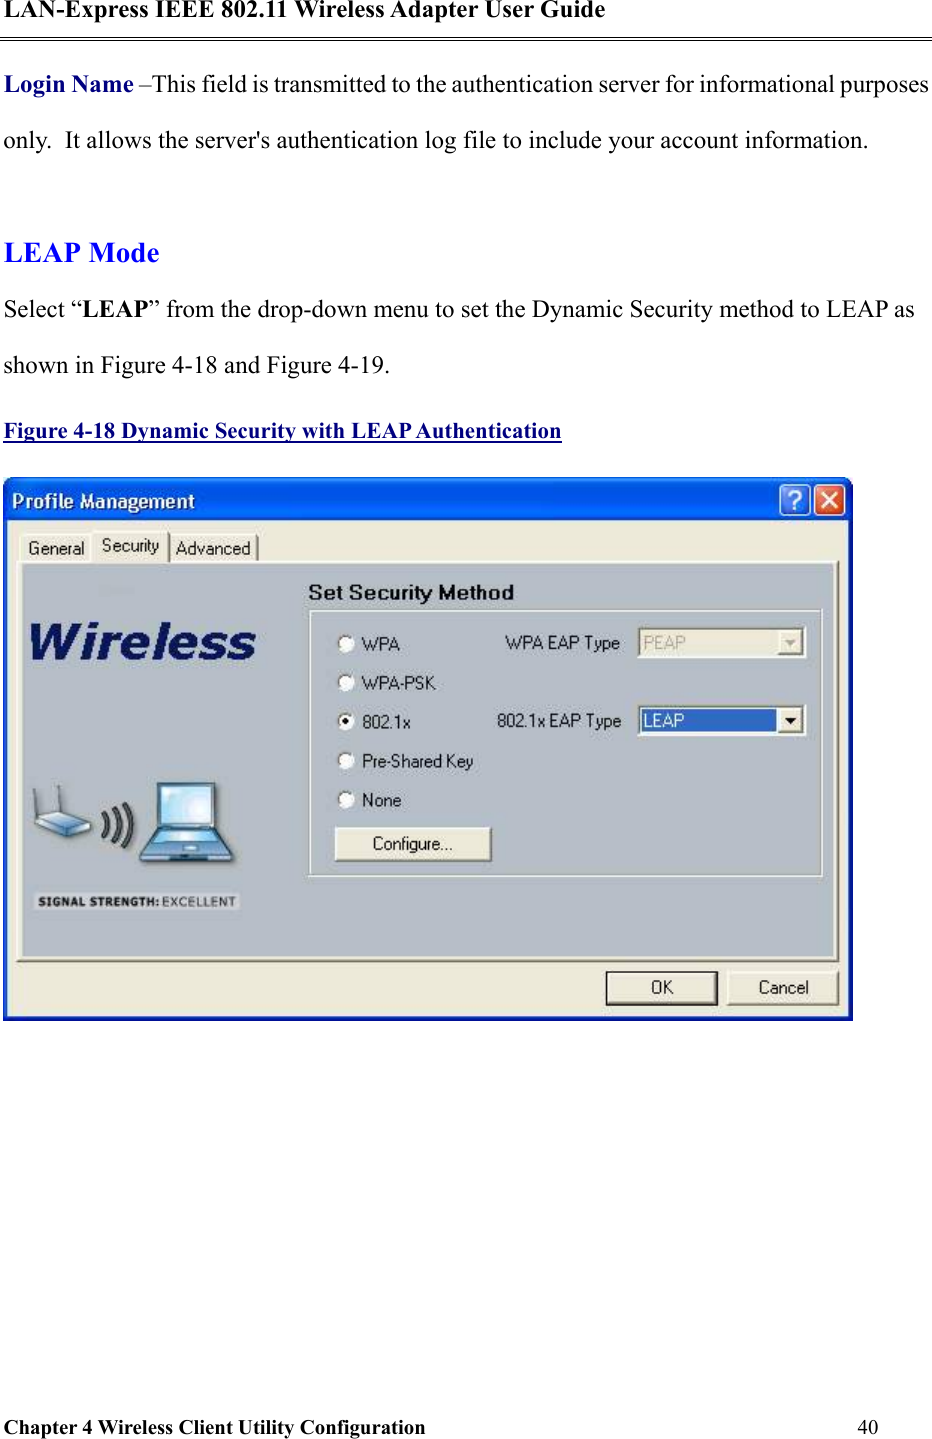 LAN-Express IEEE 802.11 Wireless Adapter User Guide Chapter 4 Wireless Client Utility Configuration   40  Login Name –This field is transmitted to the authentication server for informational purposes only.  It allows the server&apos;s authentication log file to include your account information.  LEAP Mode Select “LEAP” from the drop-down menu to set the Dynamic Security method to LEAP as shown in Figure 4-18 and Figure 4-19.  Figure 4-18 Dynamic Security with LEAP Authentication  